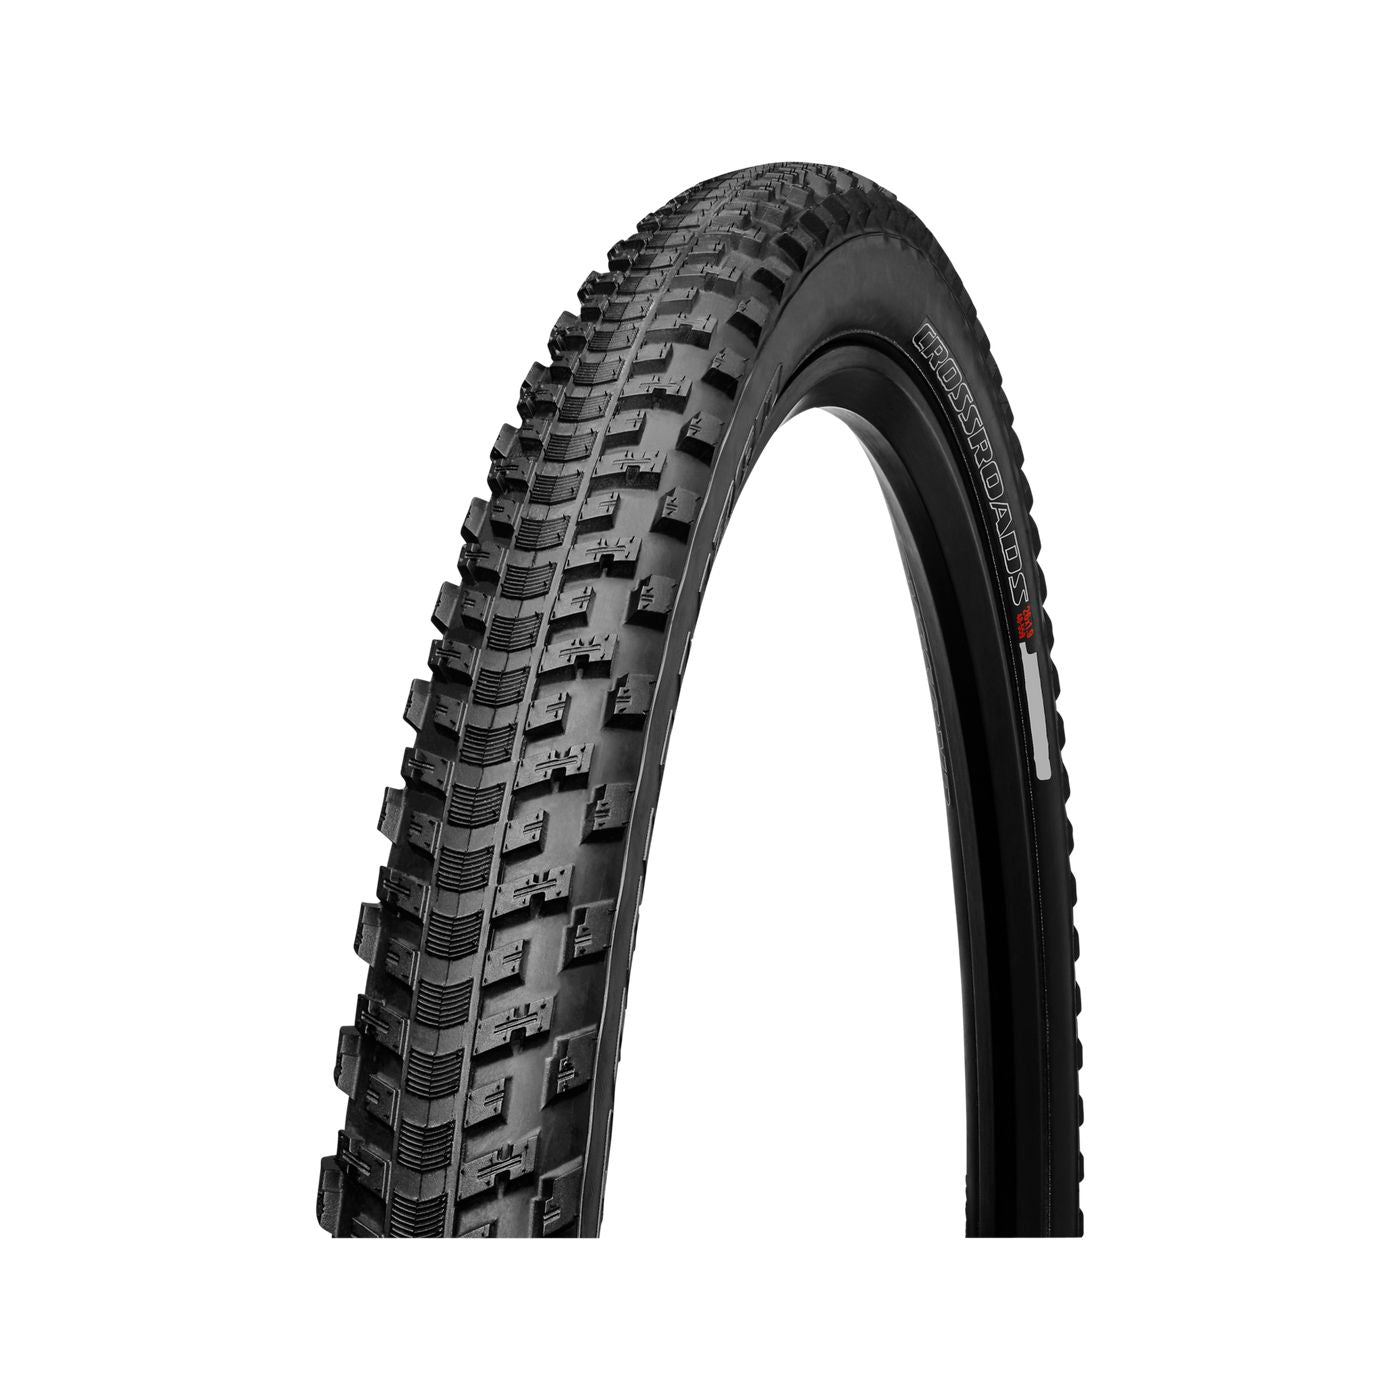 Specialized Crossroads Armadillo 700c Bike Tire - Tires - Bicycle Warehouse